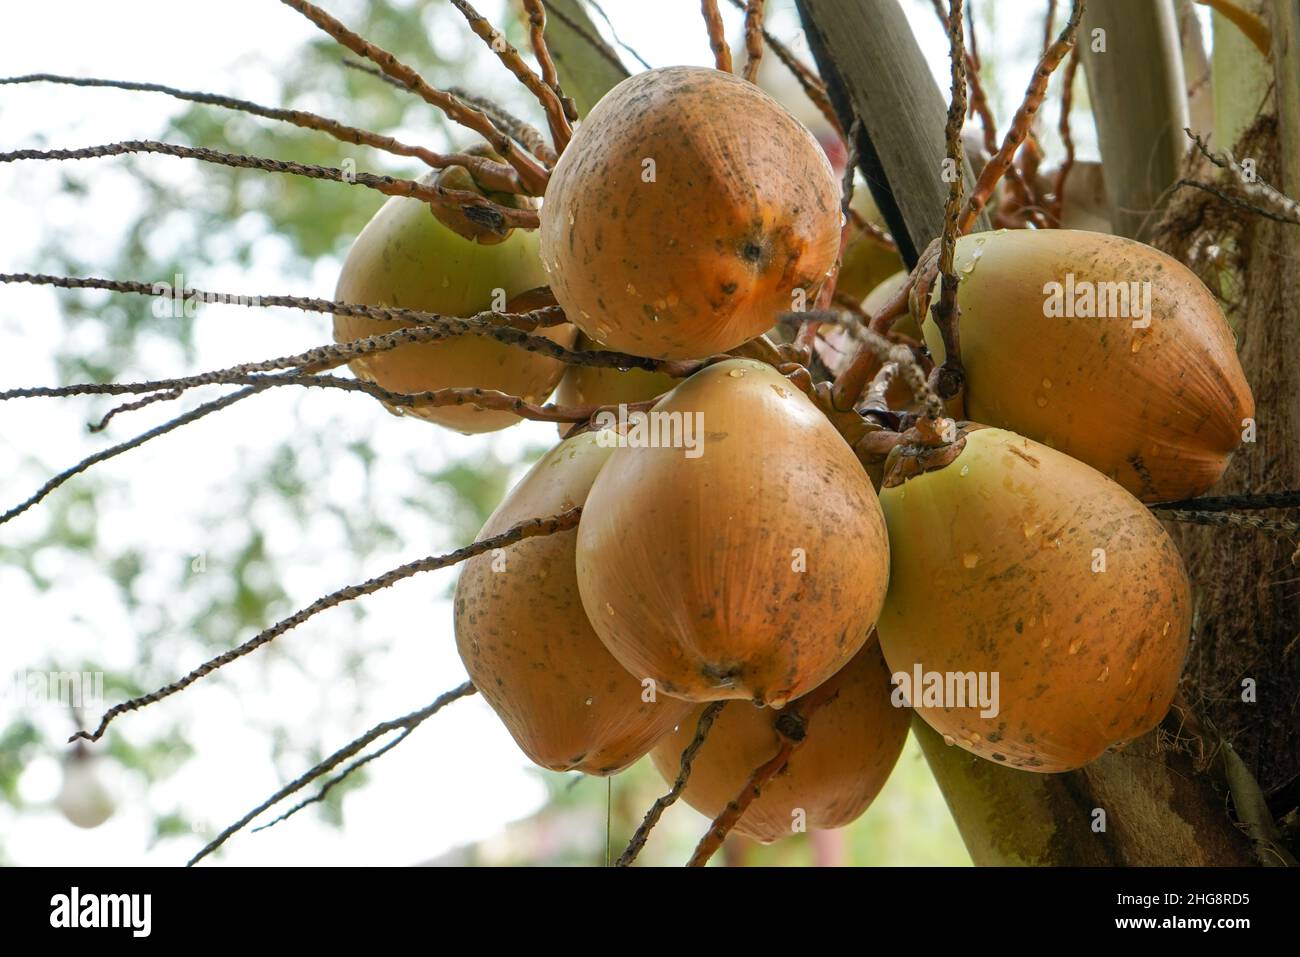 The coconut tree (Cocos nucifera) is a member of the palm tree family (Arecaceae) and the only living species of the genus Cocos. The term coconut. Stock Photo